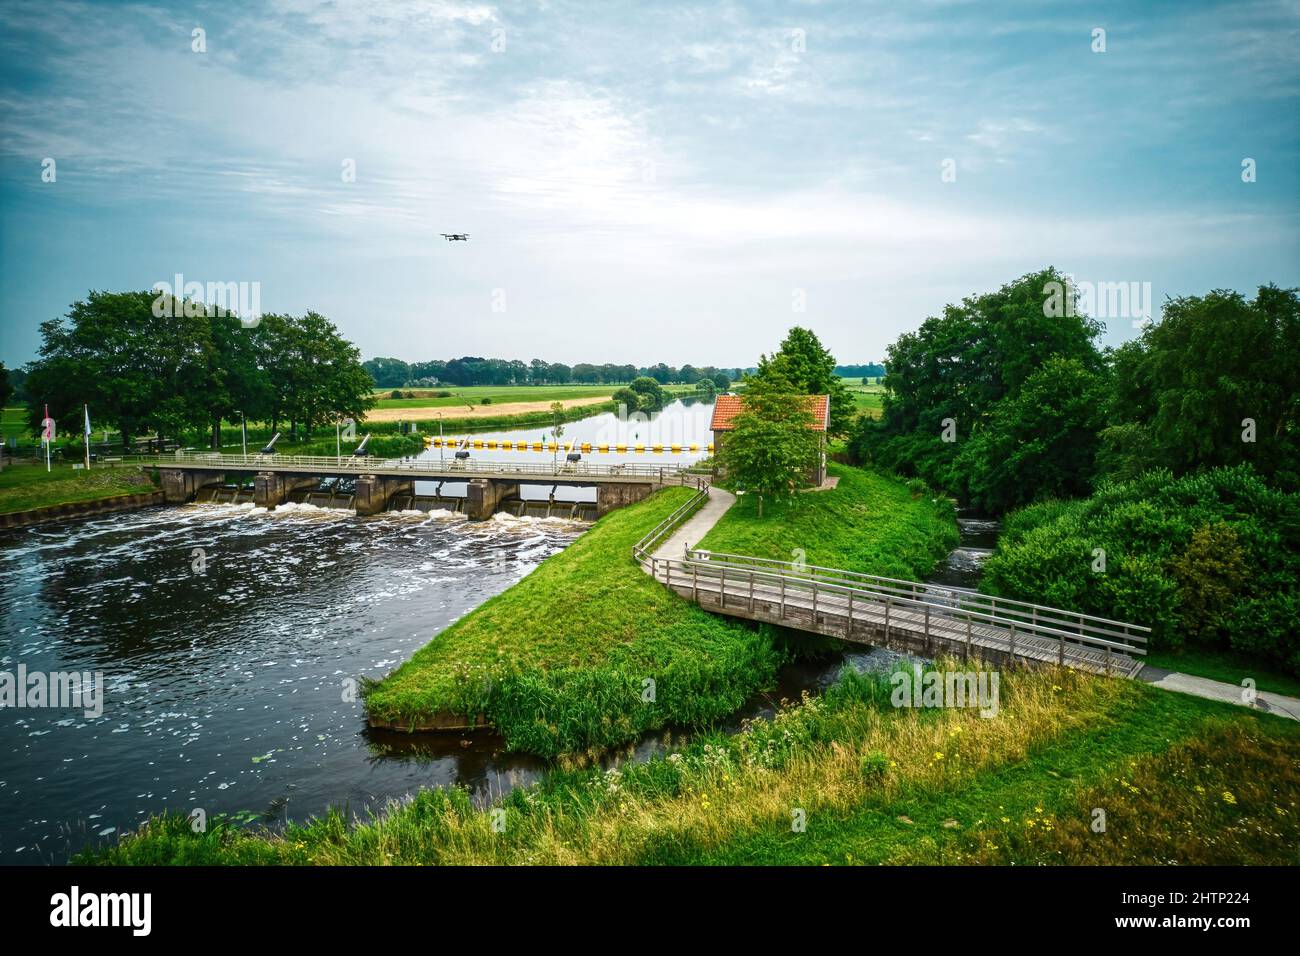 Drone view of the river the Vecht, beautiful blue sky and cycle path. Bridge and weir in the river. Flying drone in the sky. Dalfsen Netherlands Stock Photo